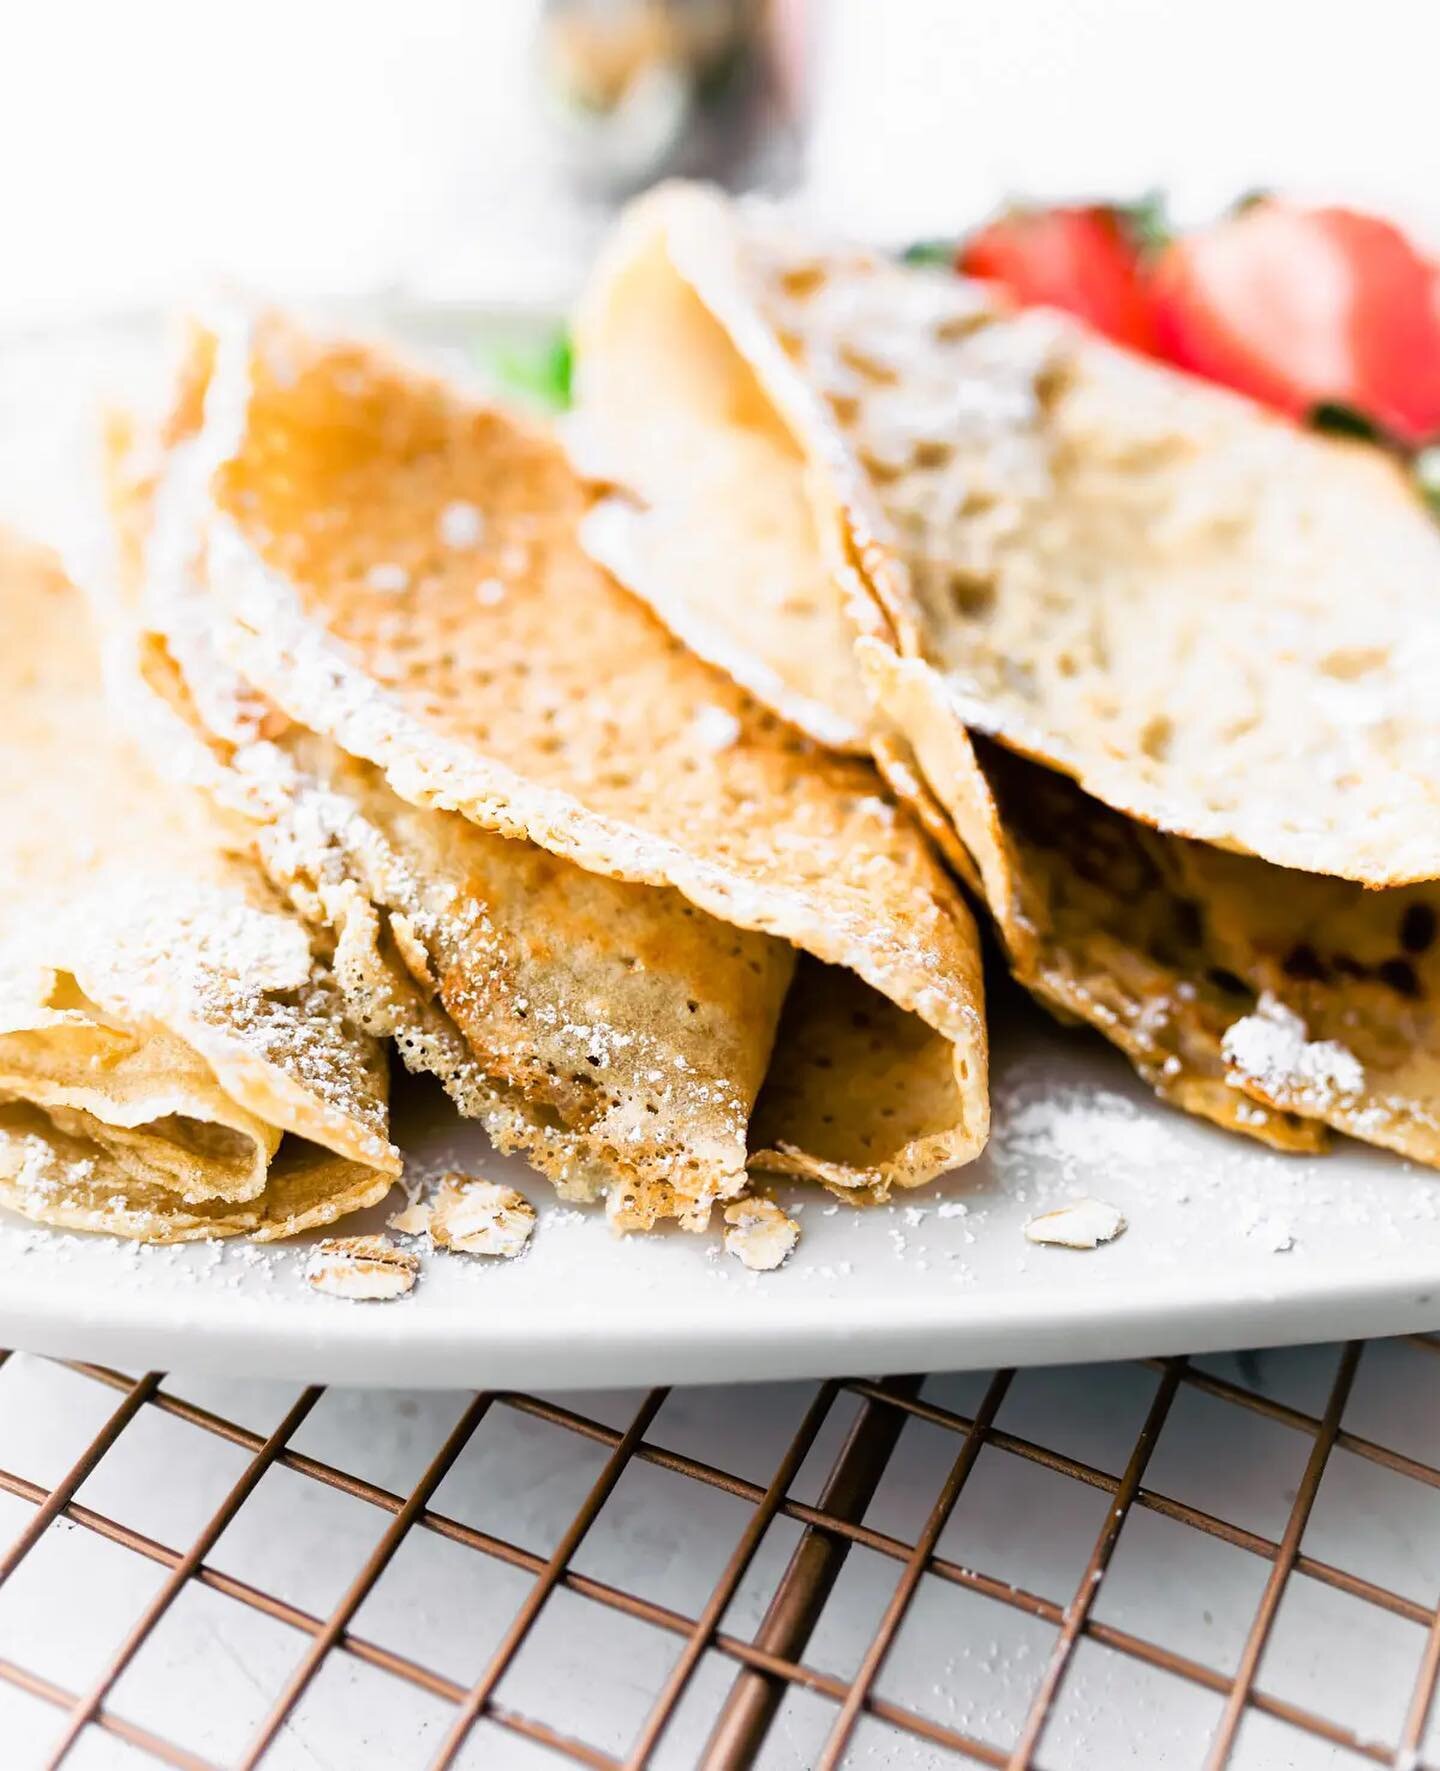 We made these oatmeal crepes this morning! They are always so fun, and the kids love them. 🤗

What are crepes, and how are they different than pancakes?

First of all, crepes feel more special than pancakes! They are more refined and more adult! ☺️ 